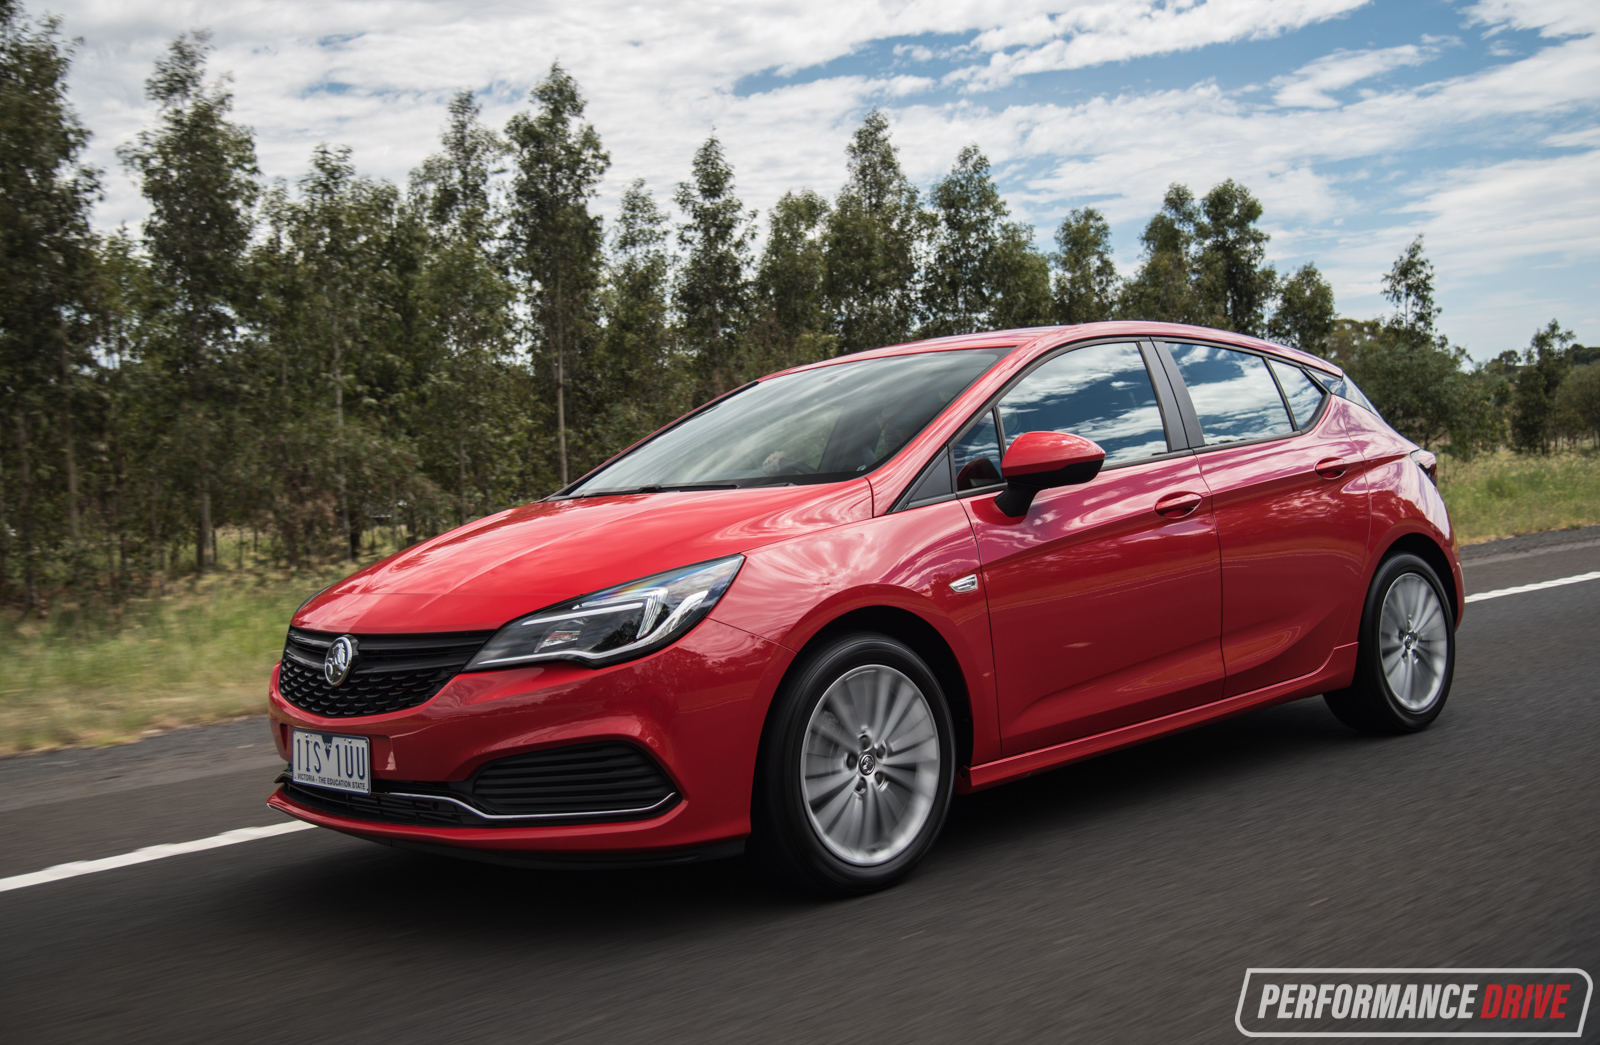 2017 Holden Astra R review (video)